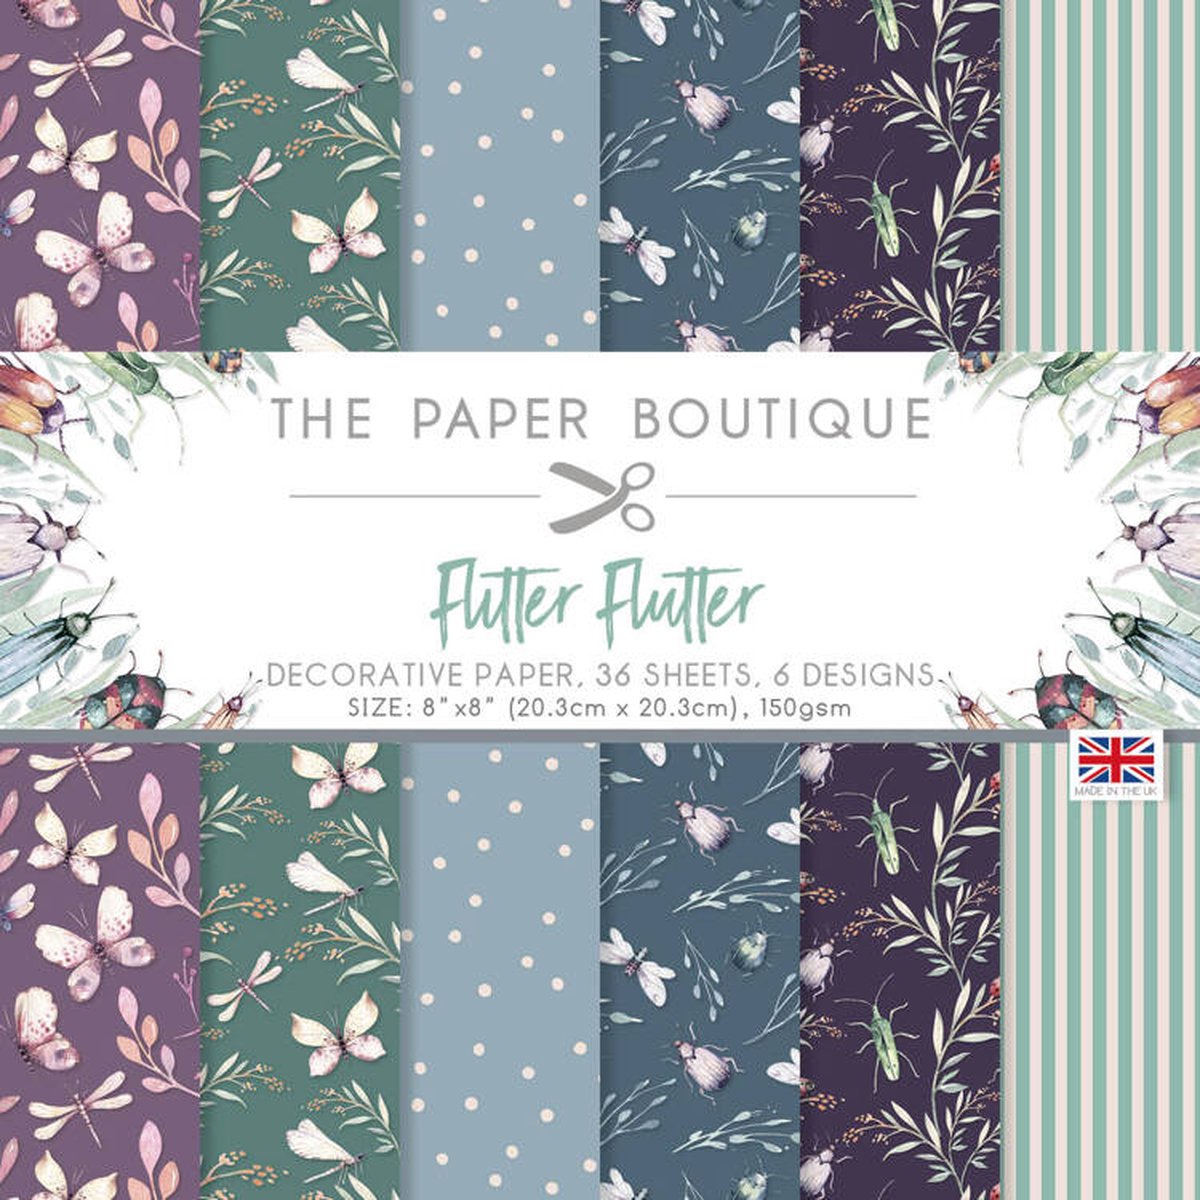 Flitter Flutter 8x8 Inch Decorative Papers (PB1915)